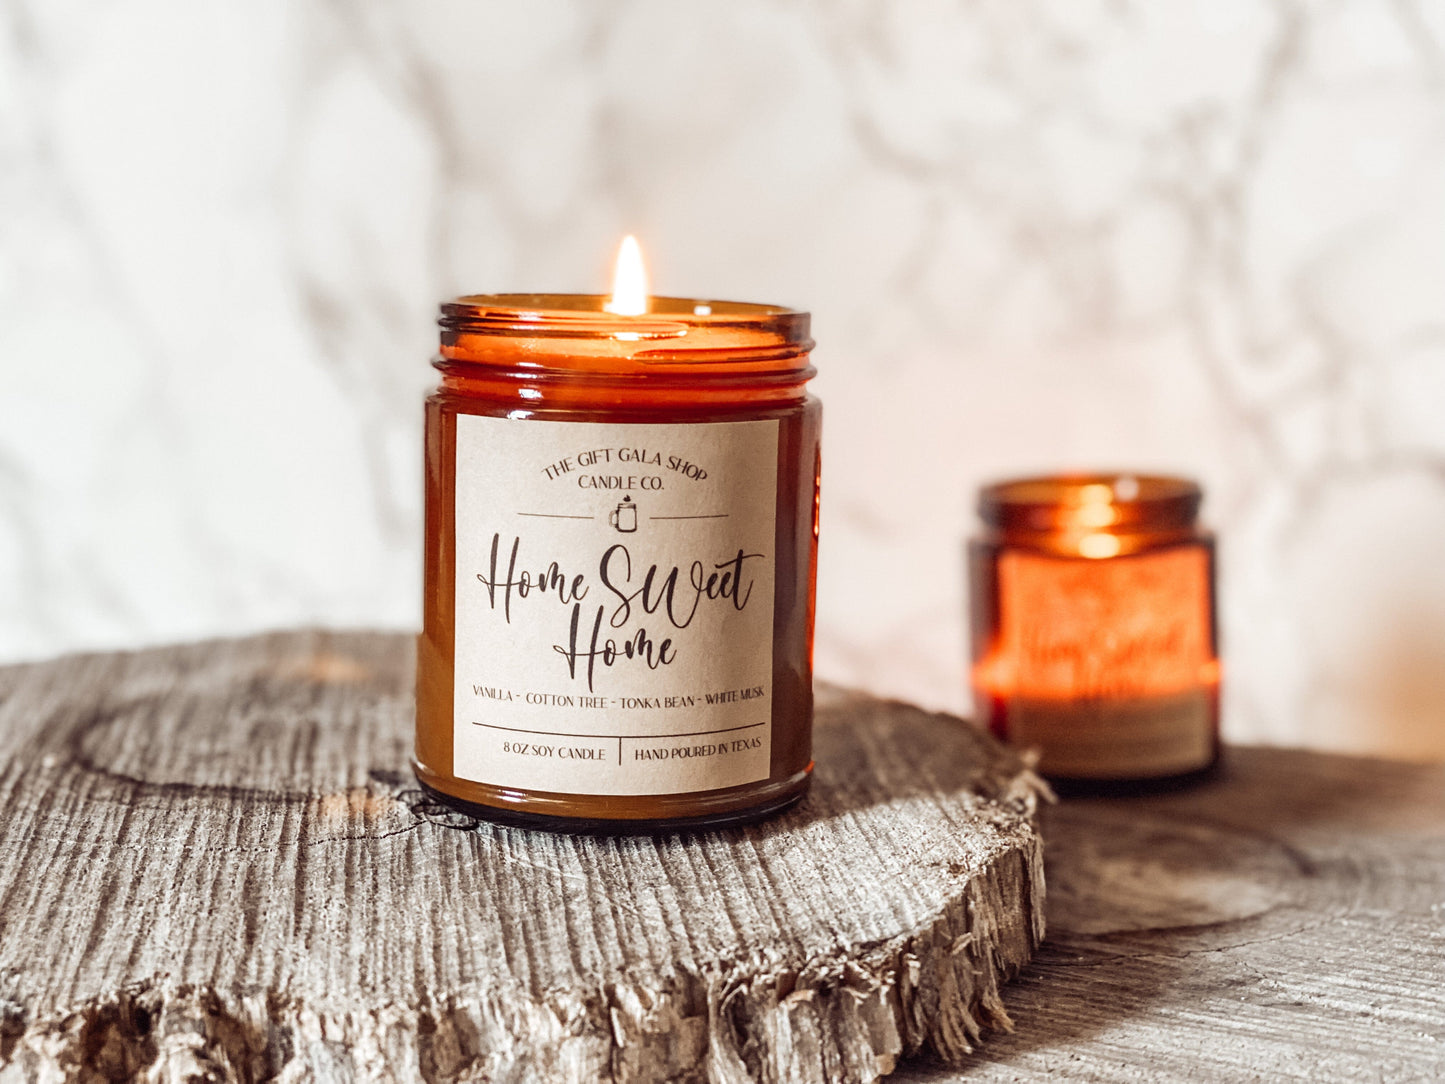 Amber Jar Soy Candle | Handmade Soy candles – The Gift Gala Shop Candle Co.